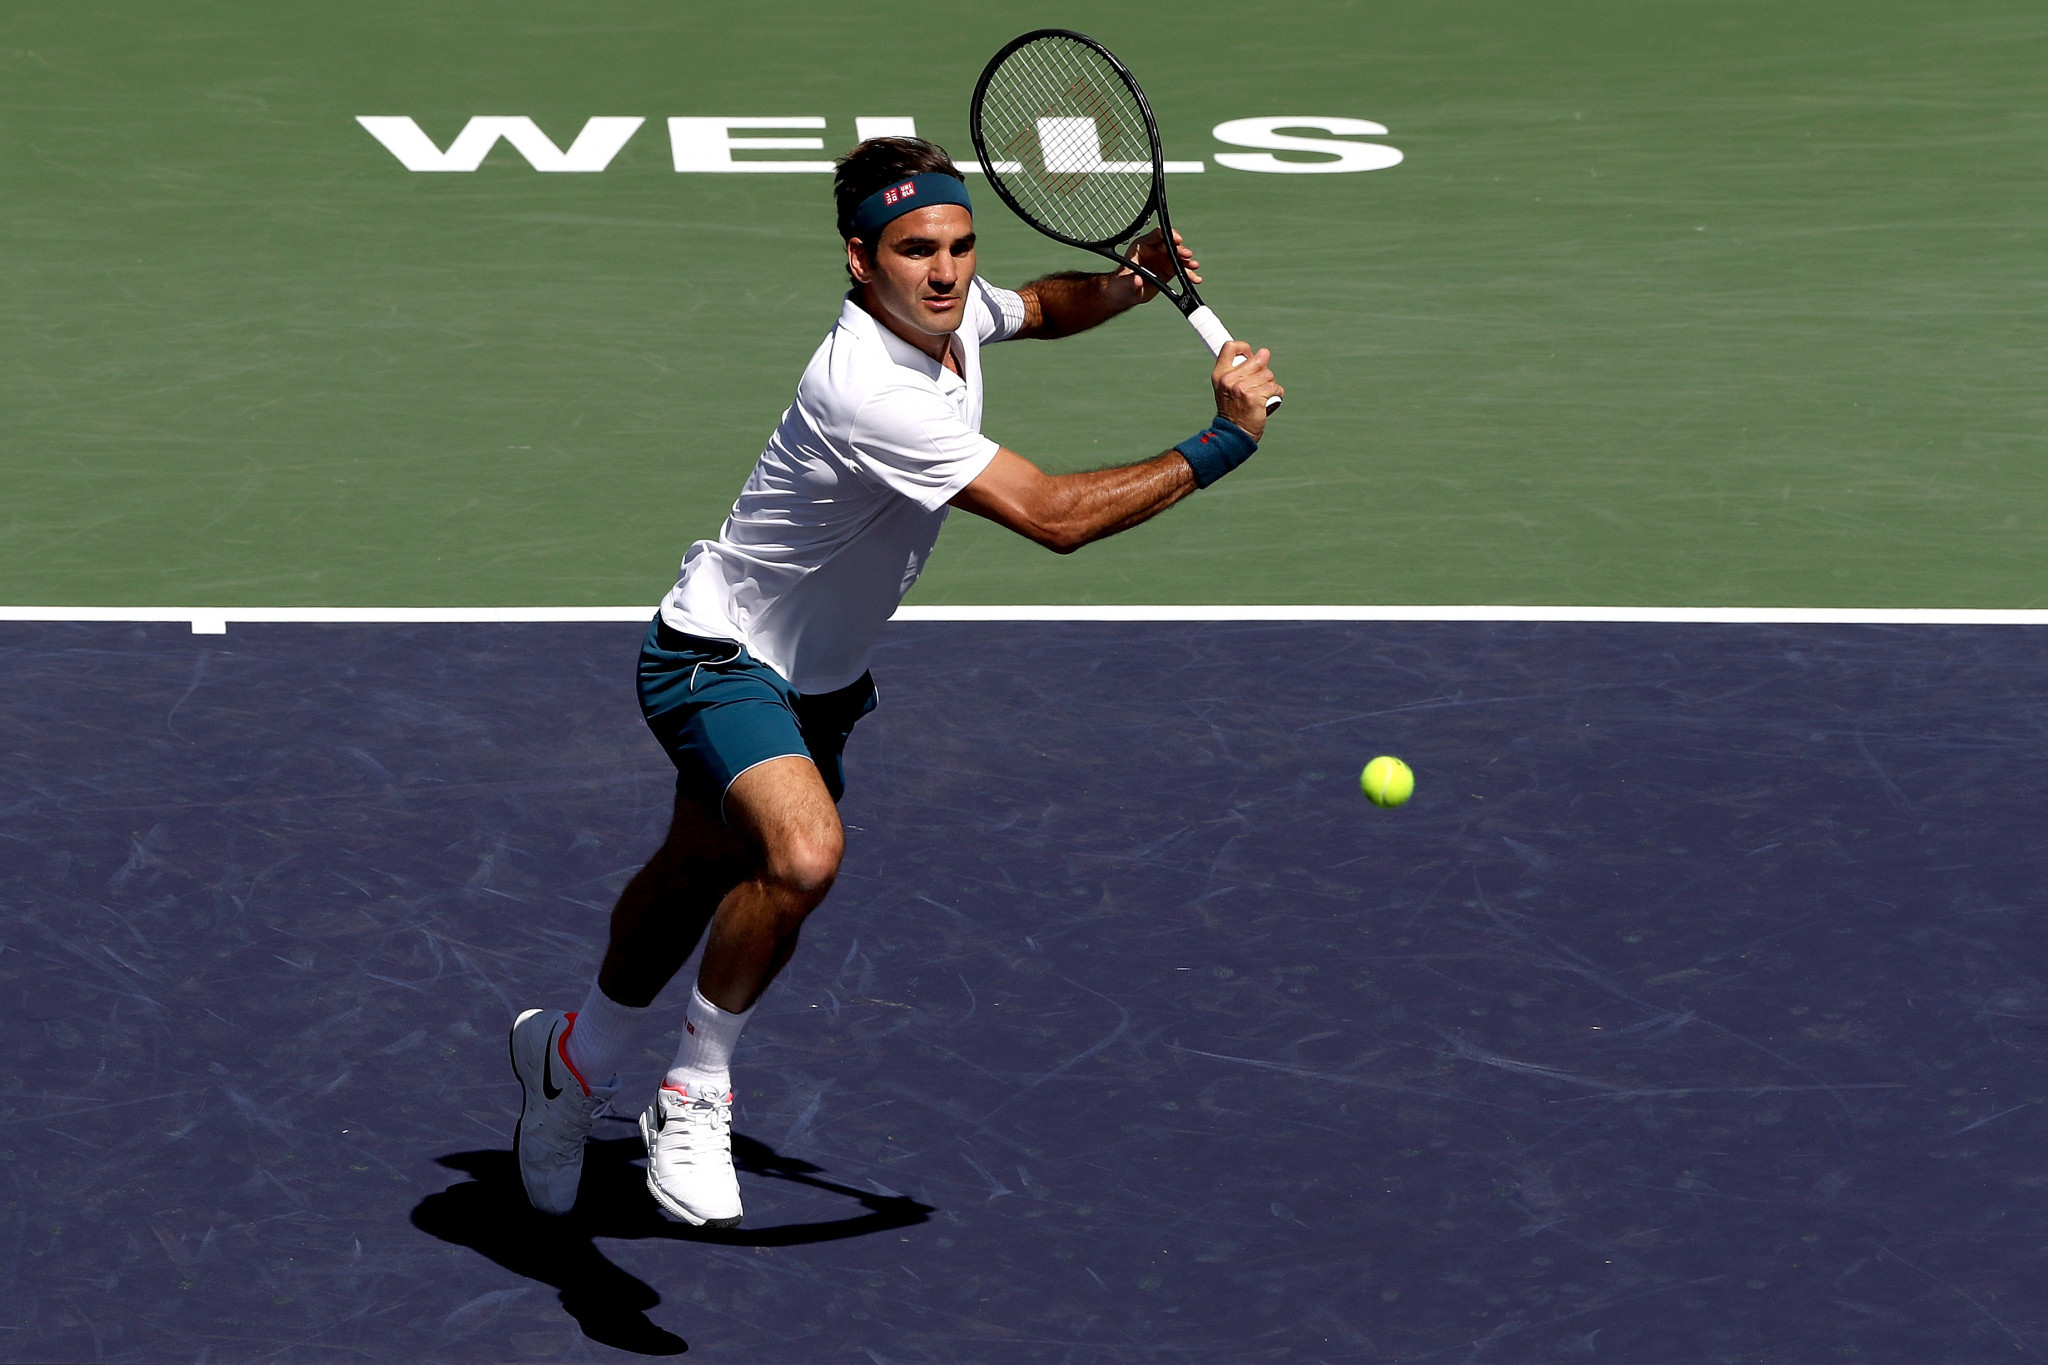 Switzerland's Roger Federer is into the final of the Indian Wells Masters without having to play his semi-final after Rafael Nadal withdrew injured ©Getty Images